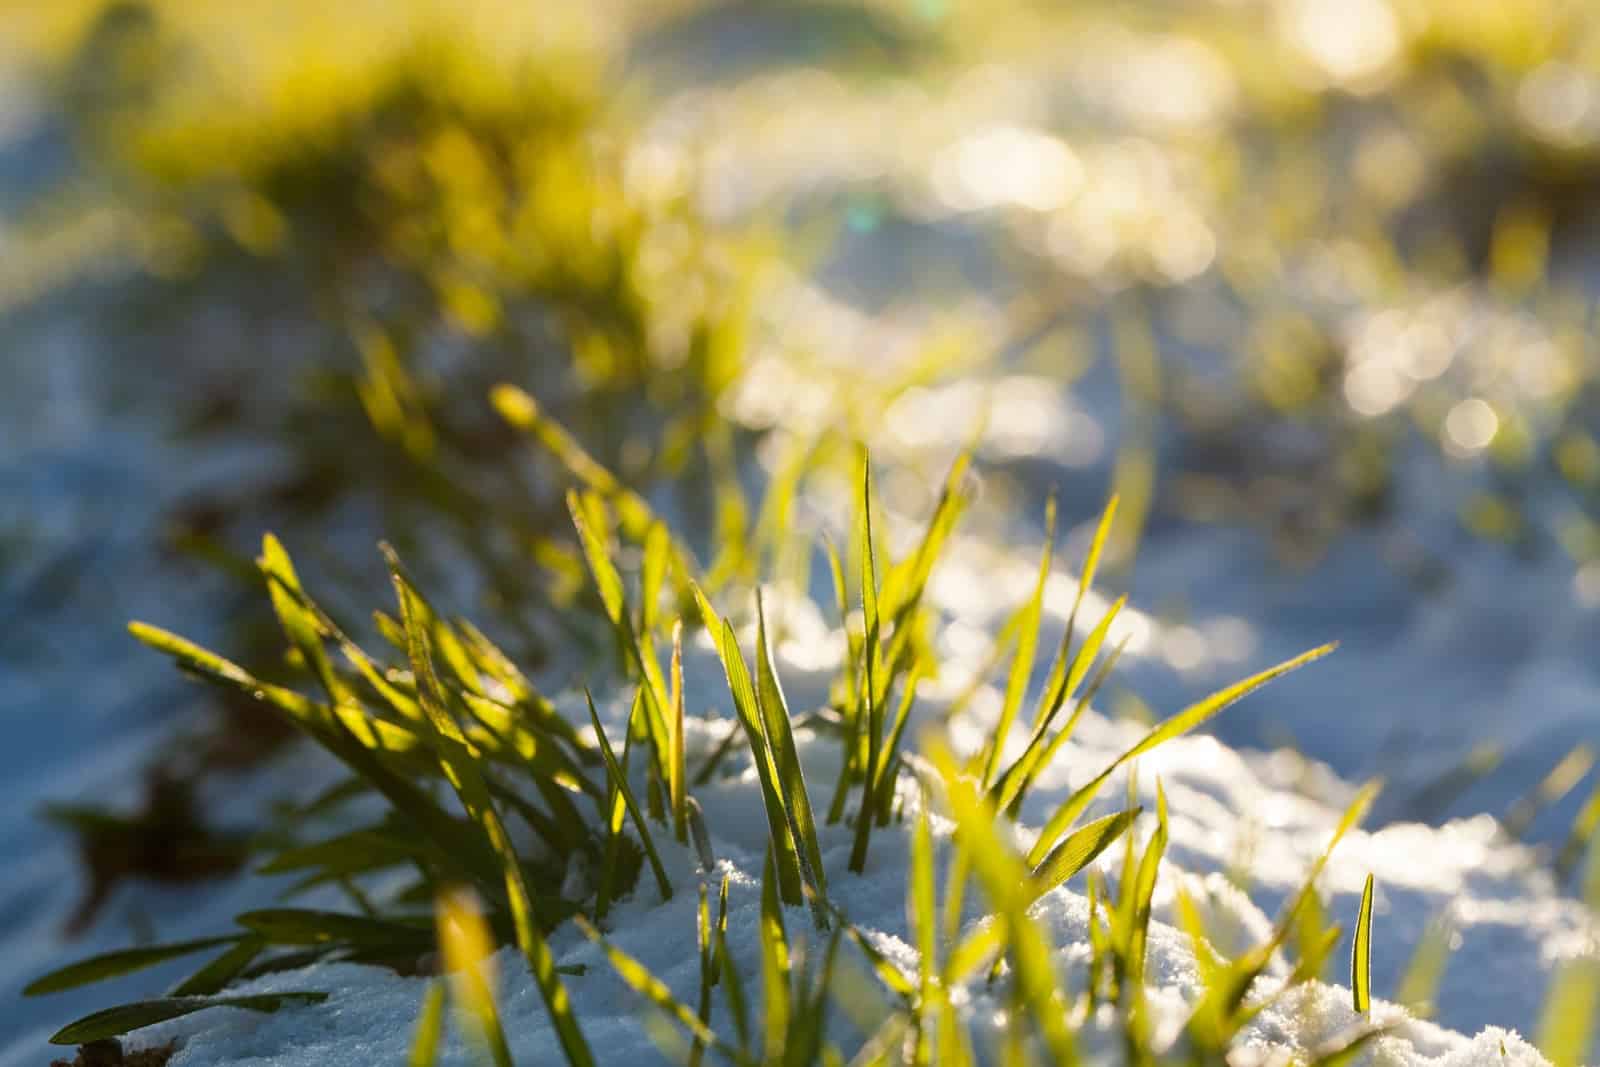 Grass covered with snow and ice in winter